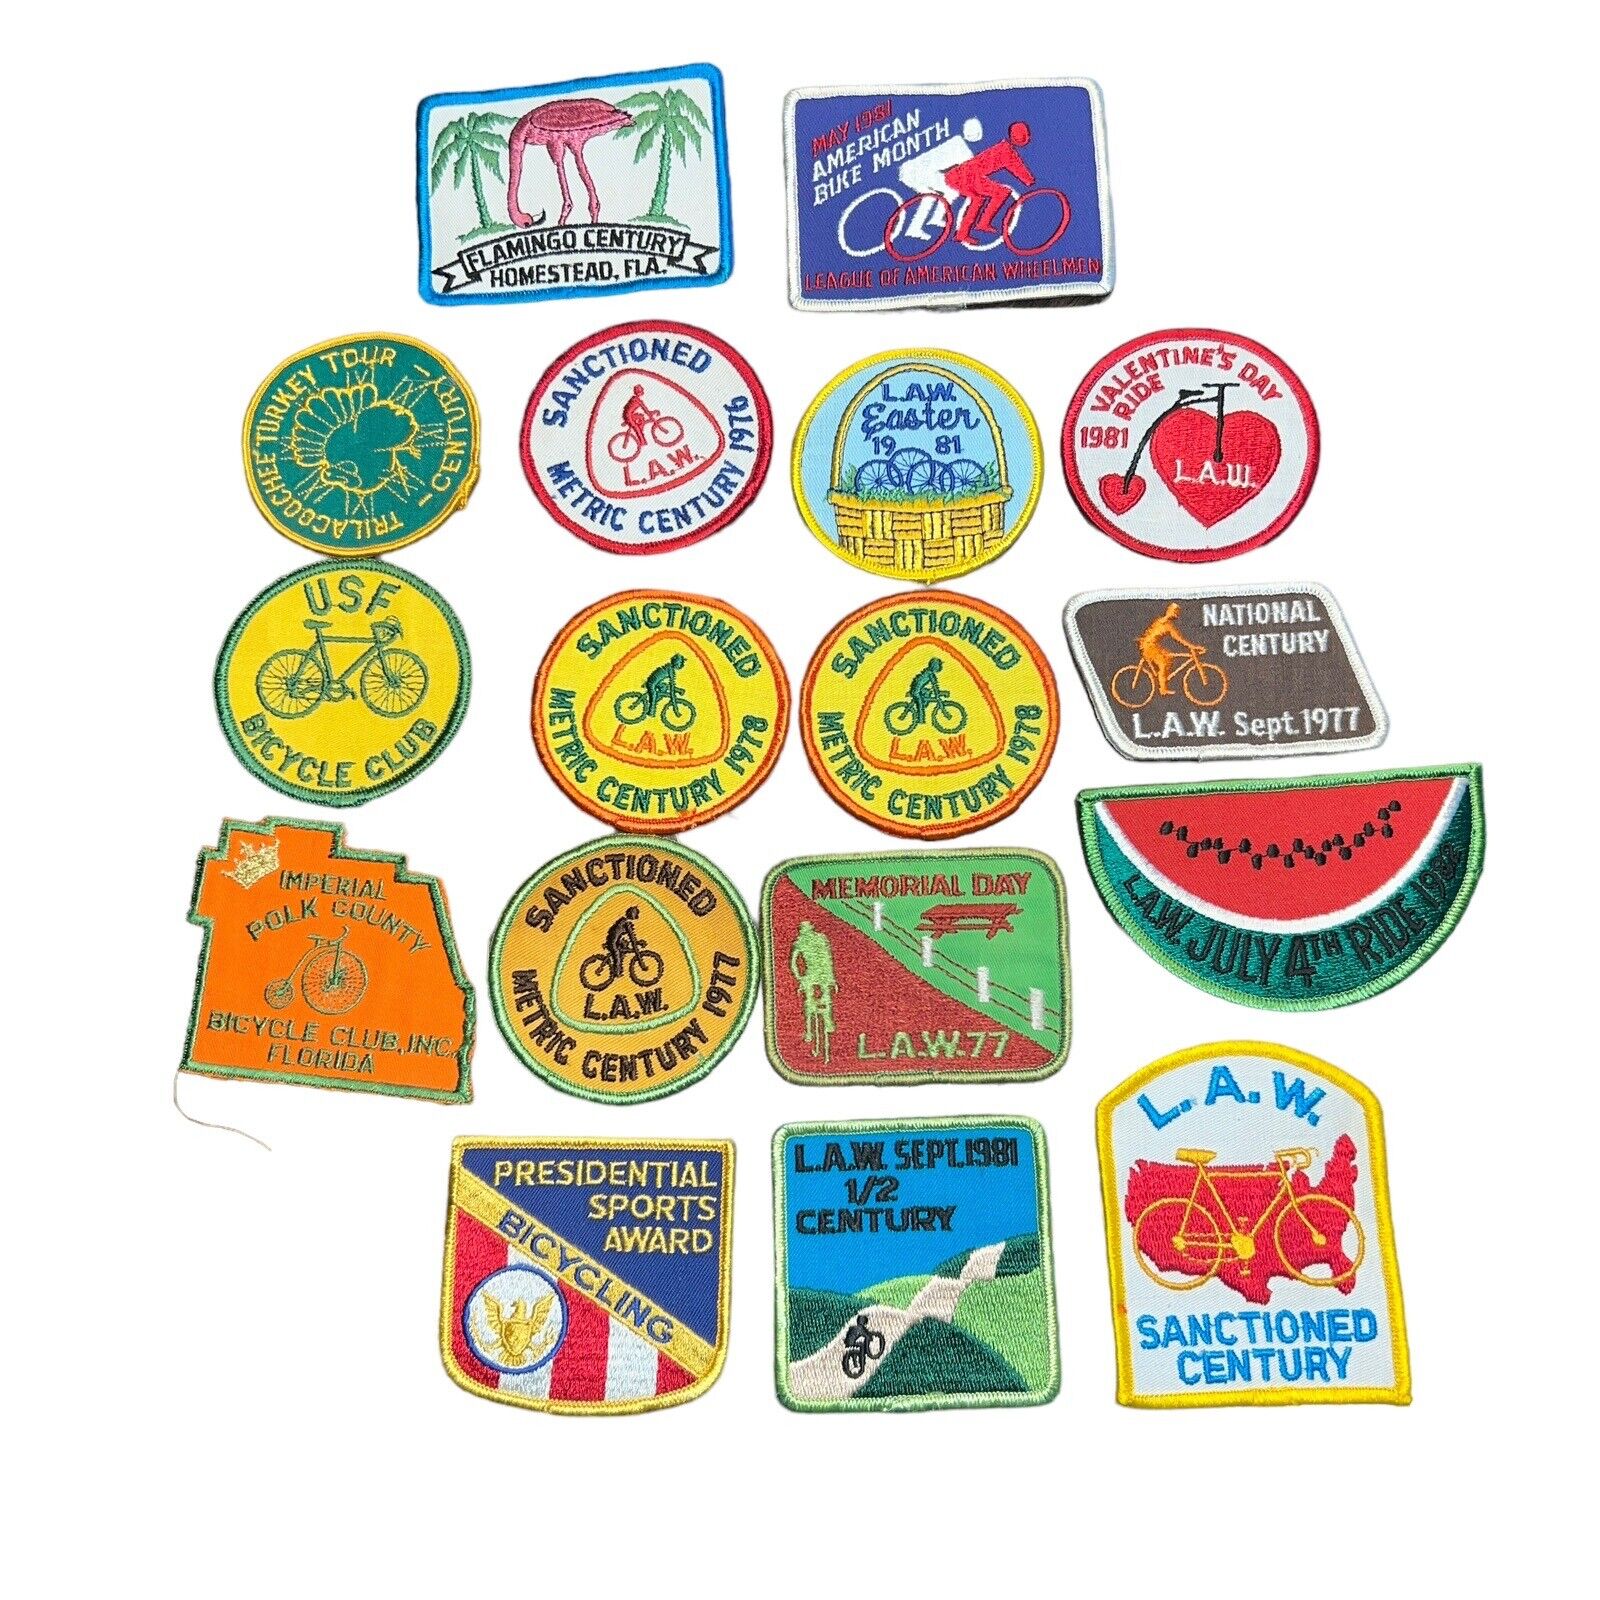 17 vintage bike patches dating back to 77